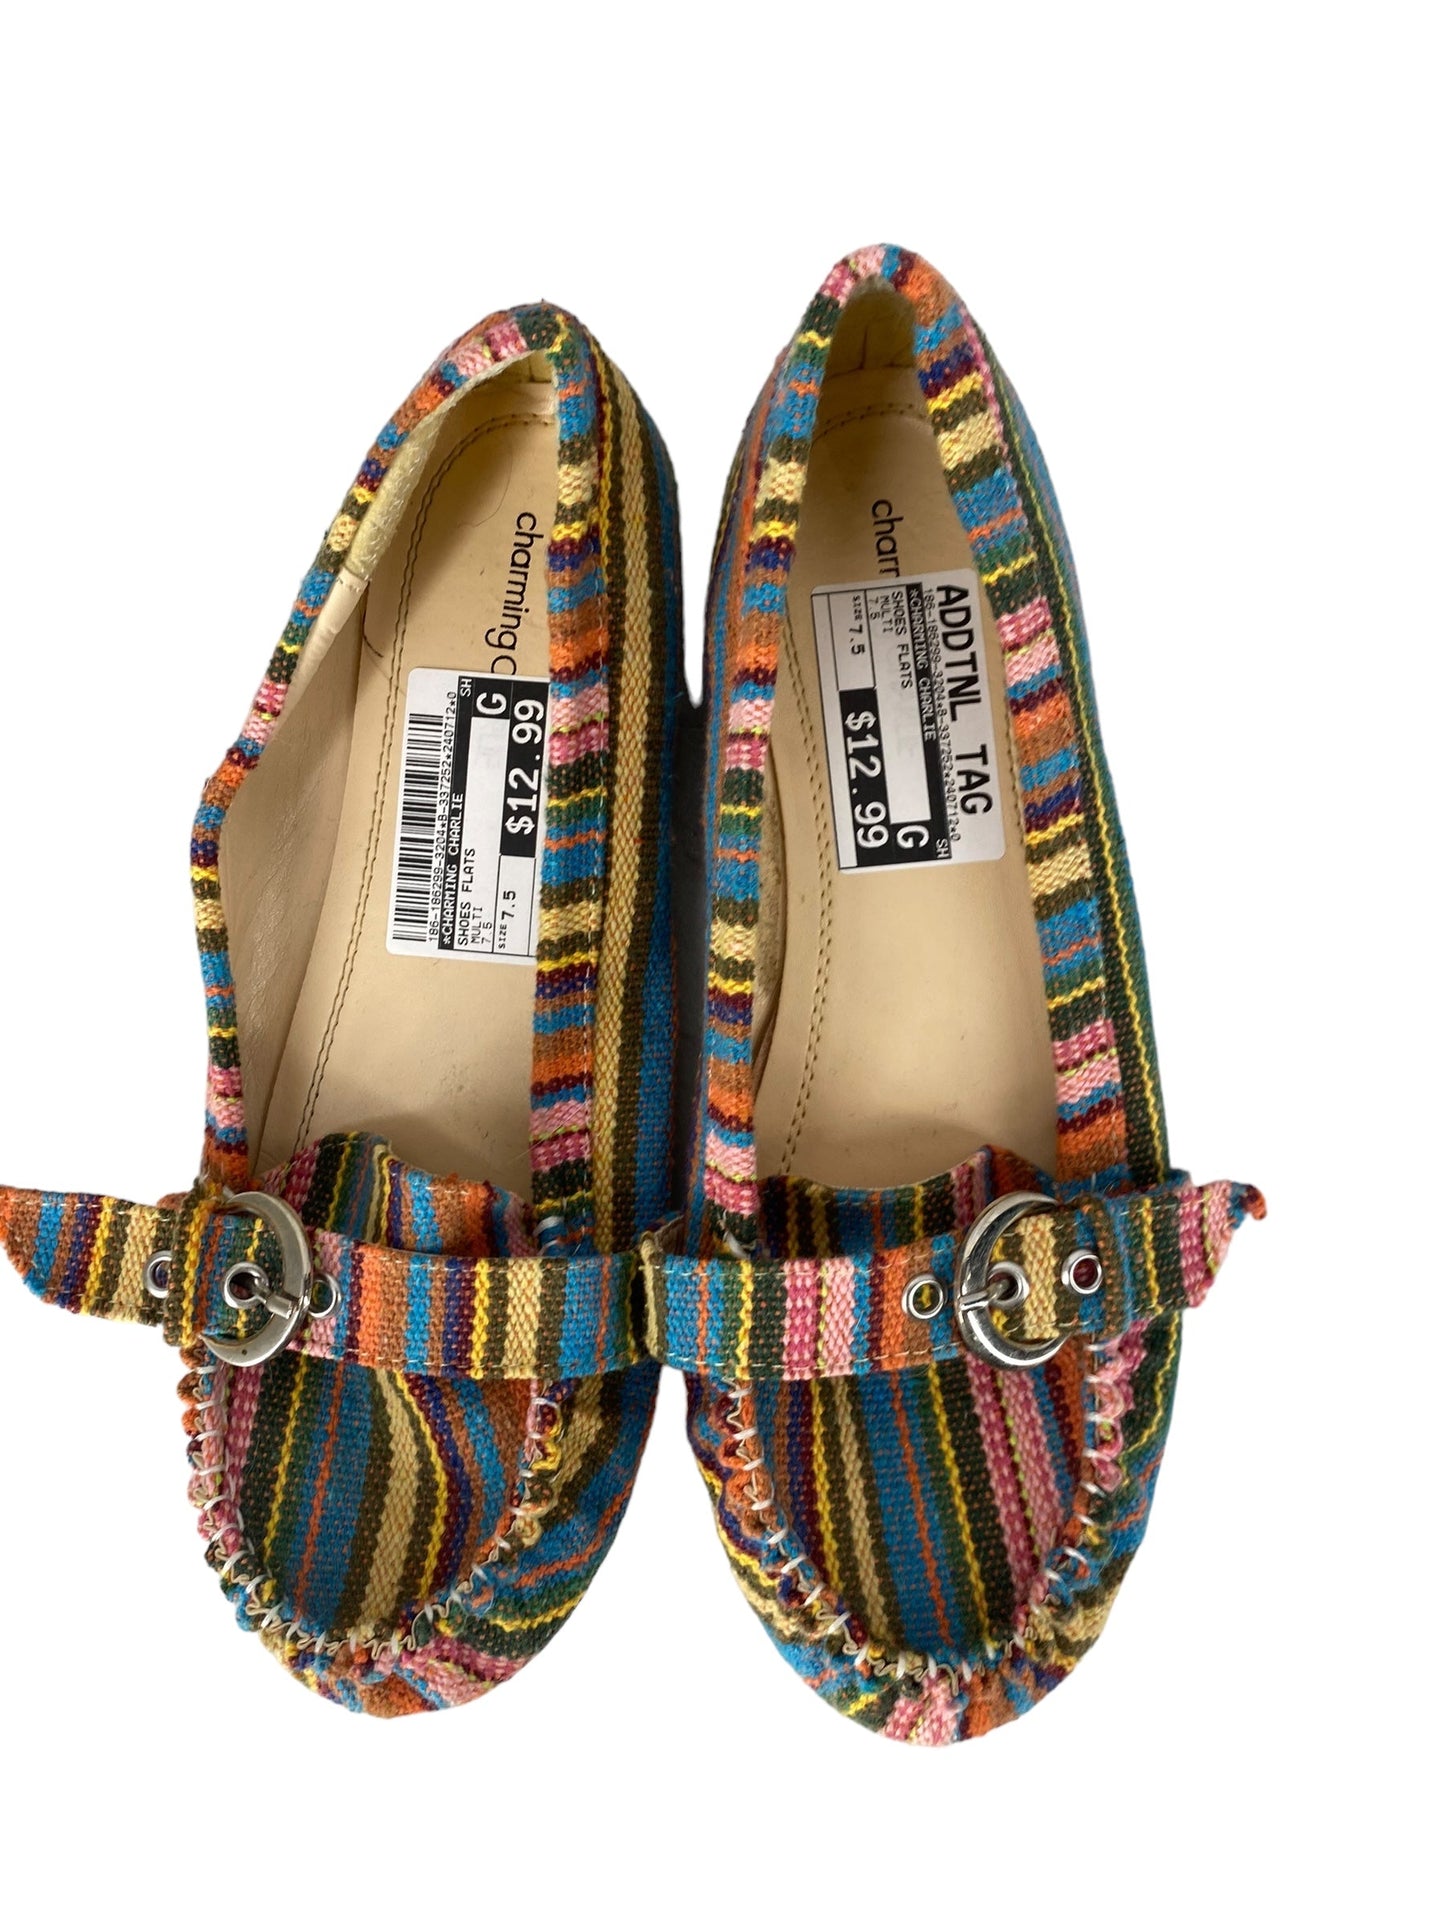 Multi-colored Shoes Flats Charming Charlie, Size 7.5